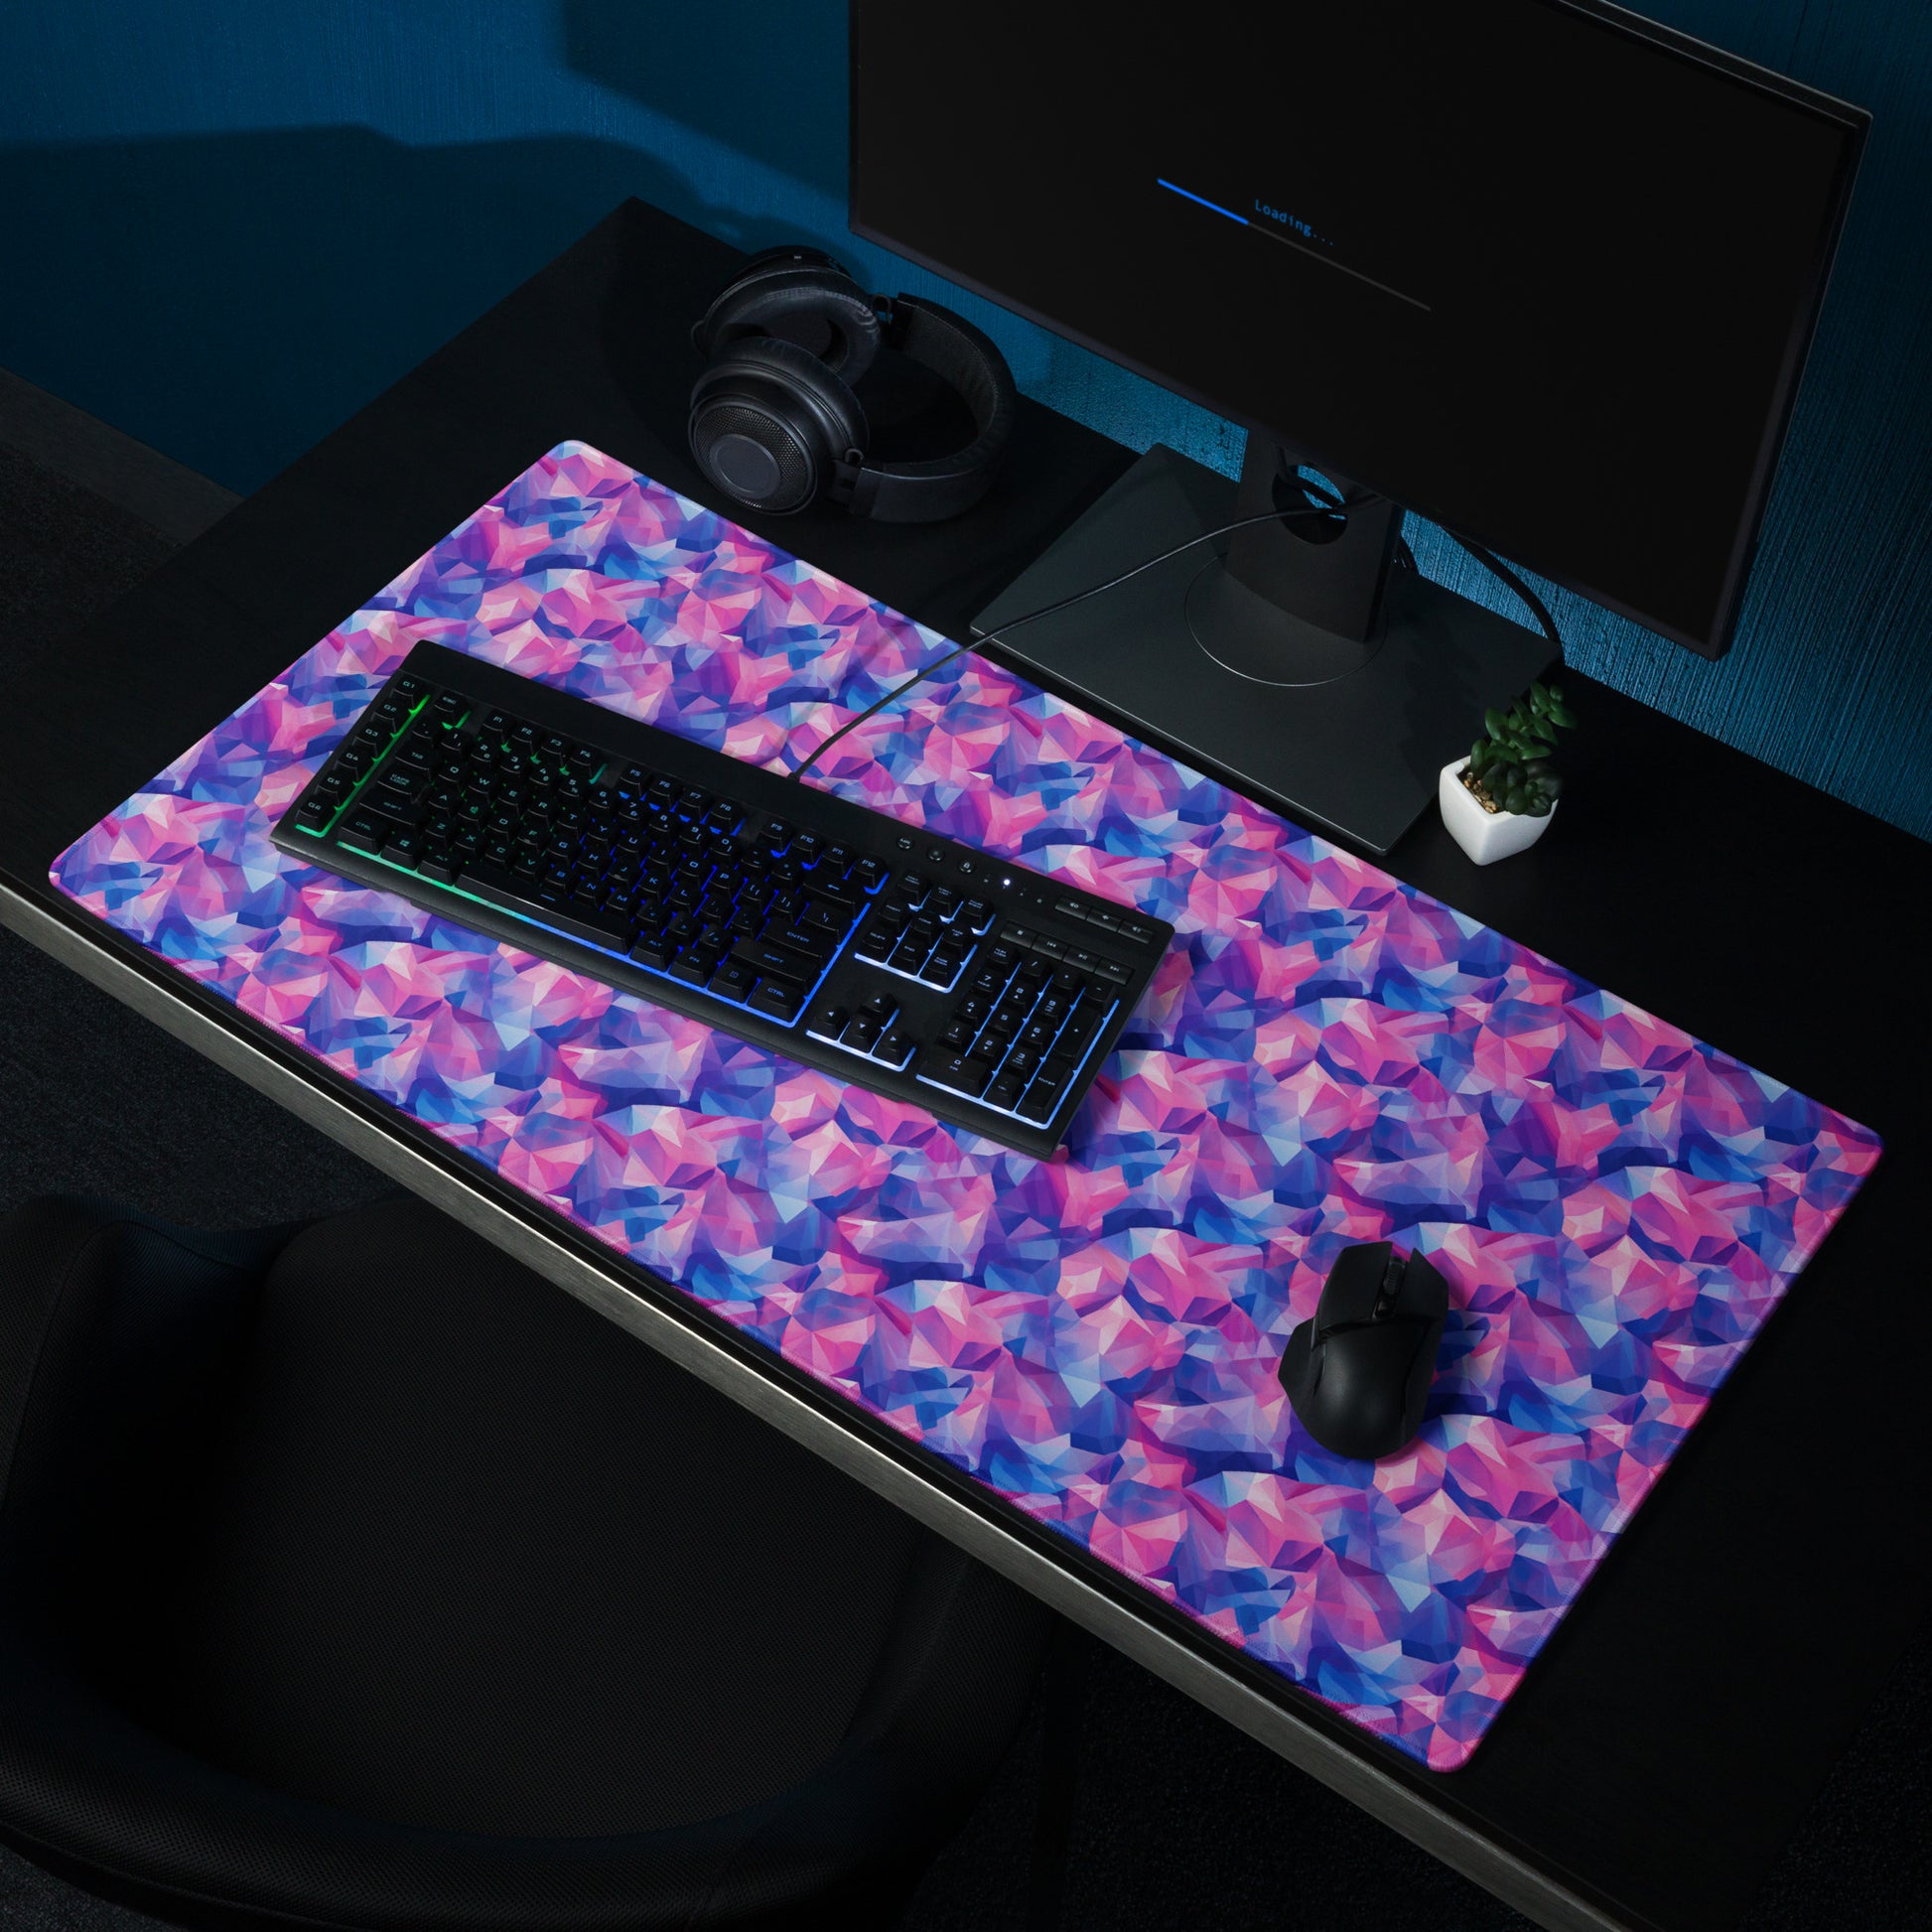 A 36" x 18" gaming desk pad with pink and blue crystals. It sits on a black desk with a monitor, keyboard, and mouse.